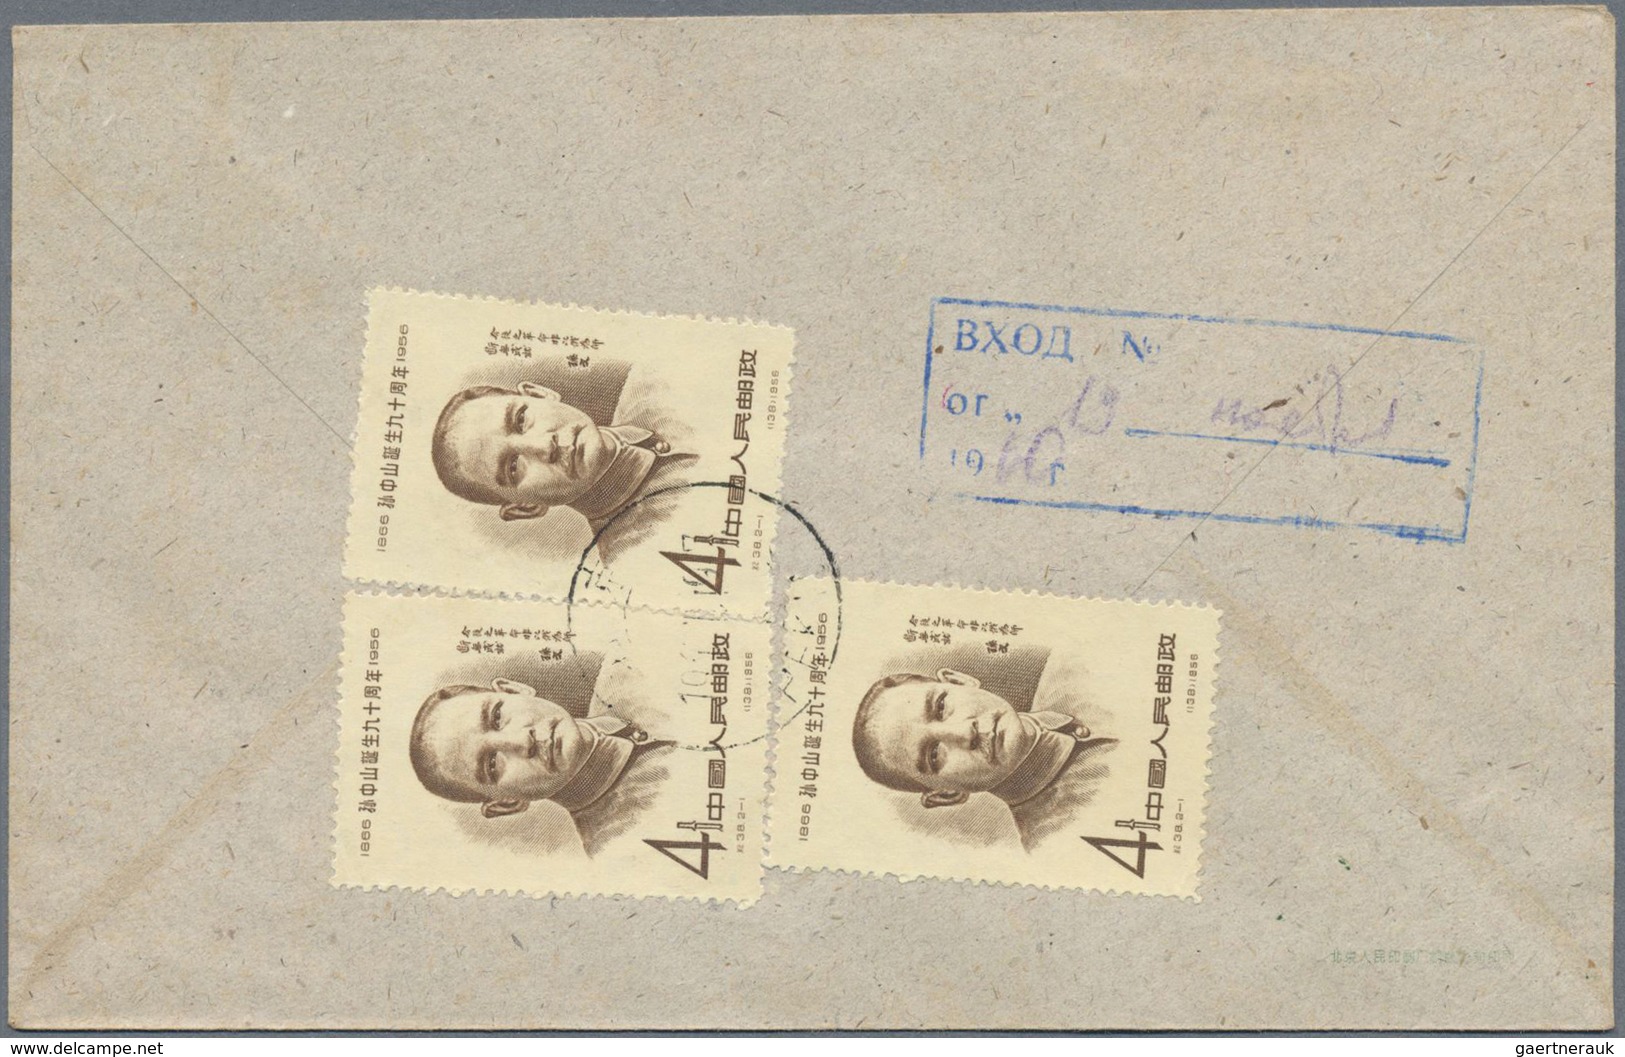 Br China - Volksrepublik: 1954/88 (ca.), covers/used ppc (88) plus cultural revolution opera "Red lante